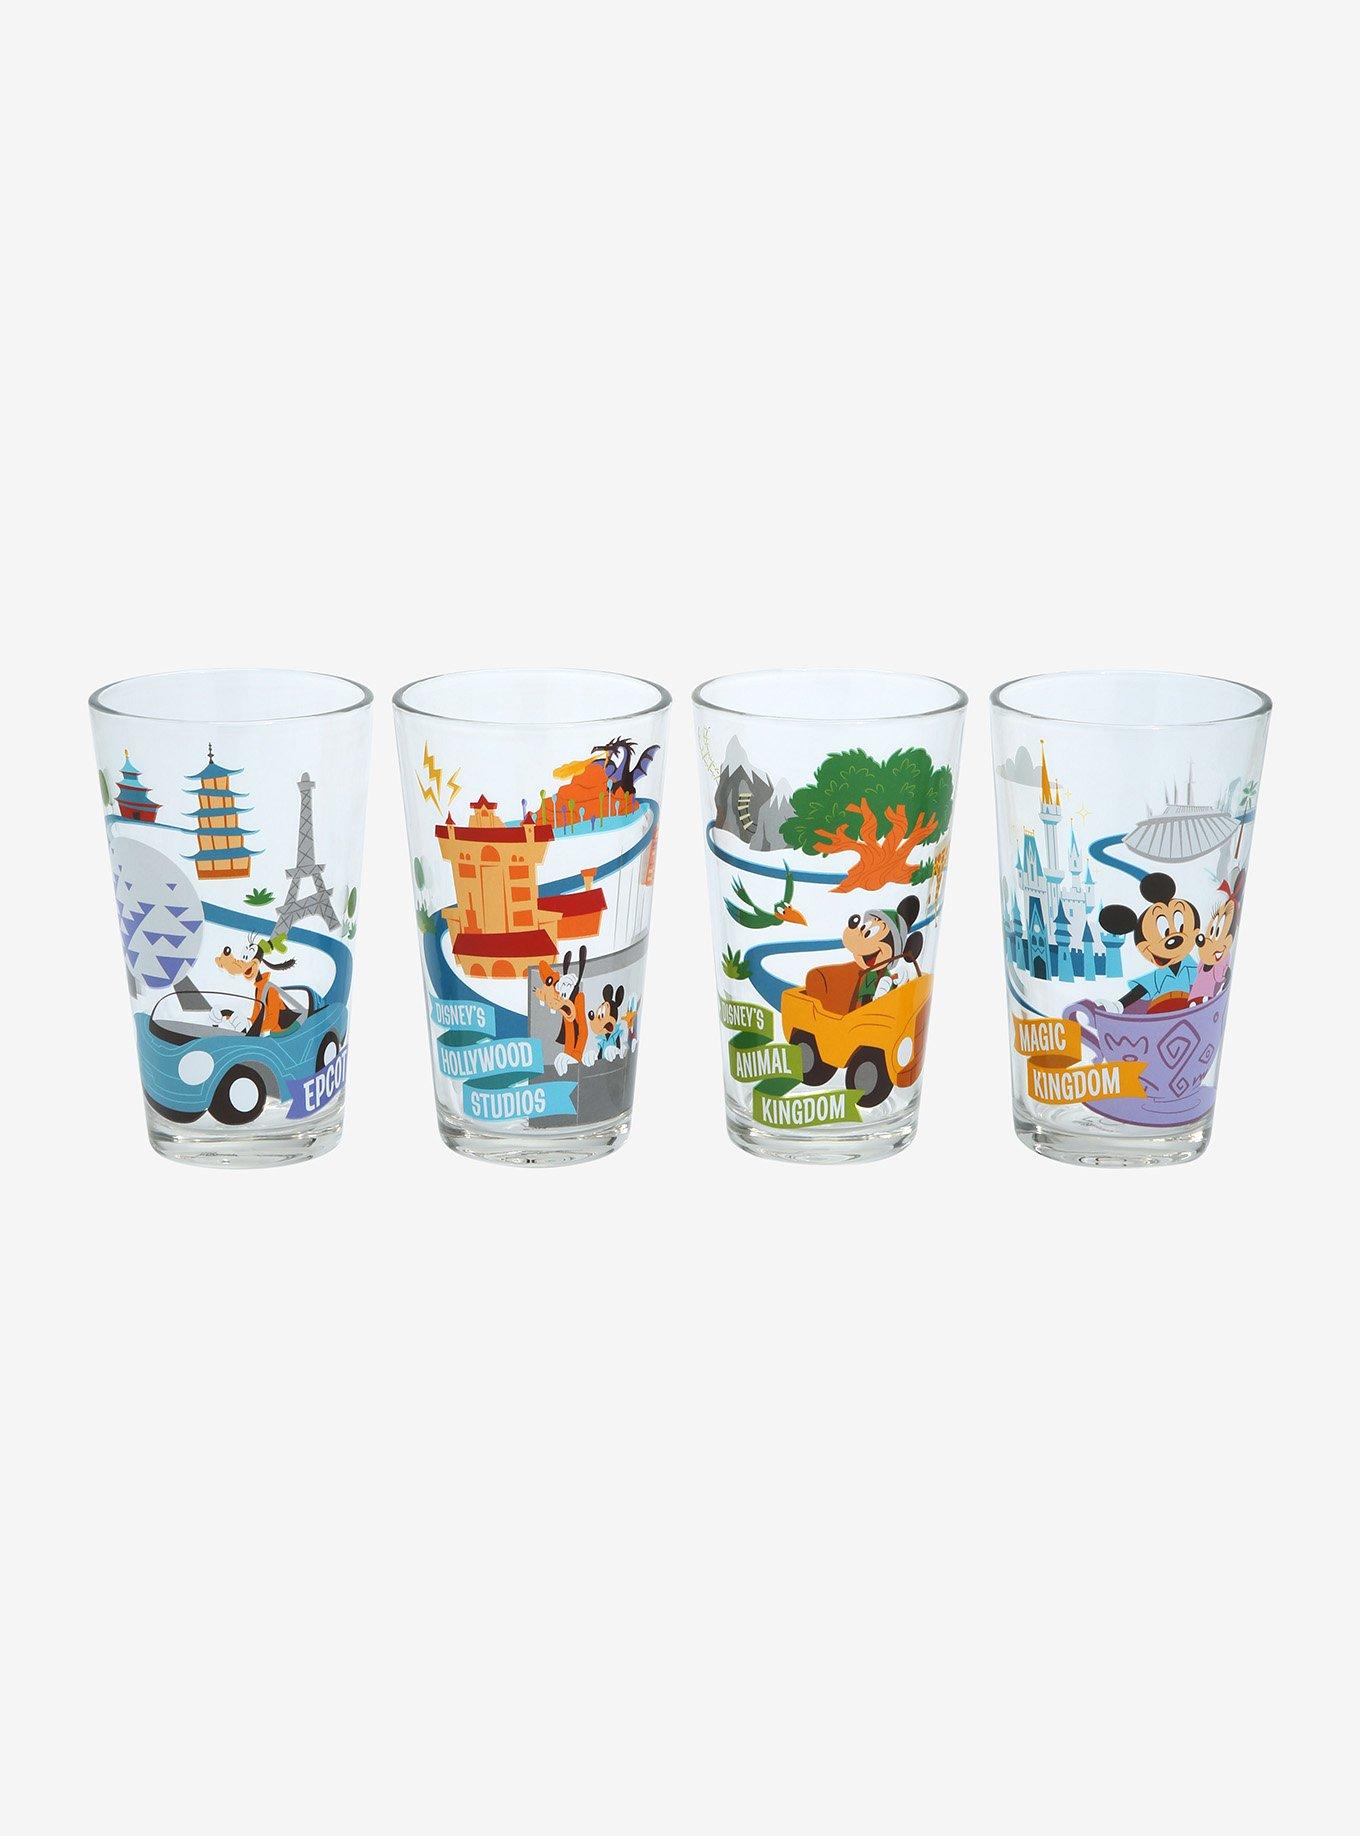 NEW PACKAGED 3 DRINKING GLASS PACK OFFICIAL WALT DISNEY 101